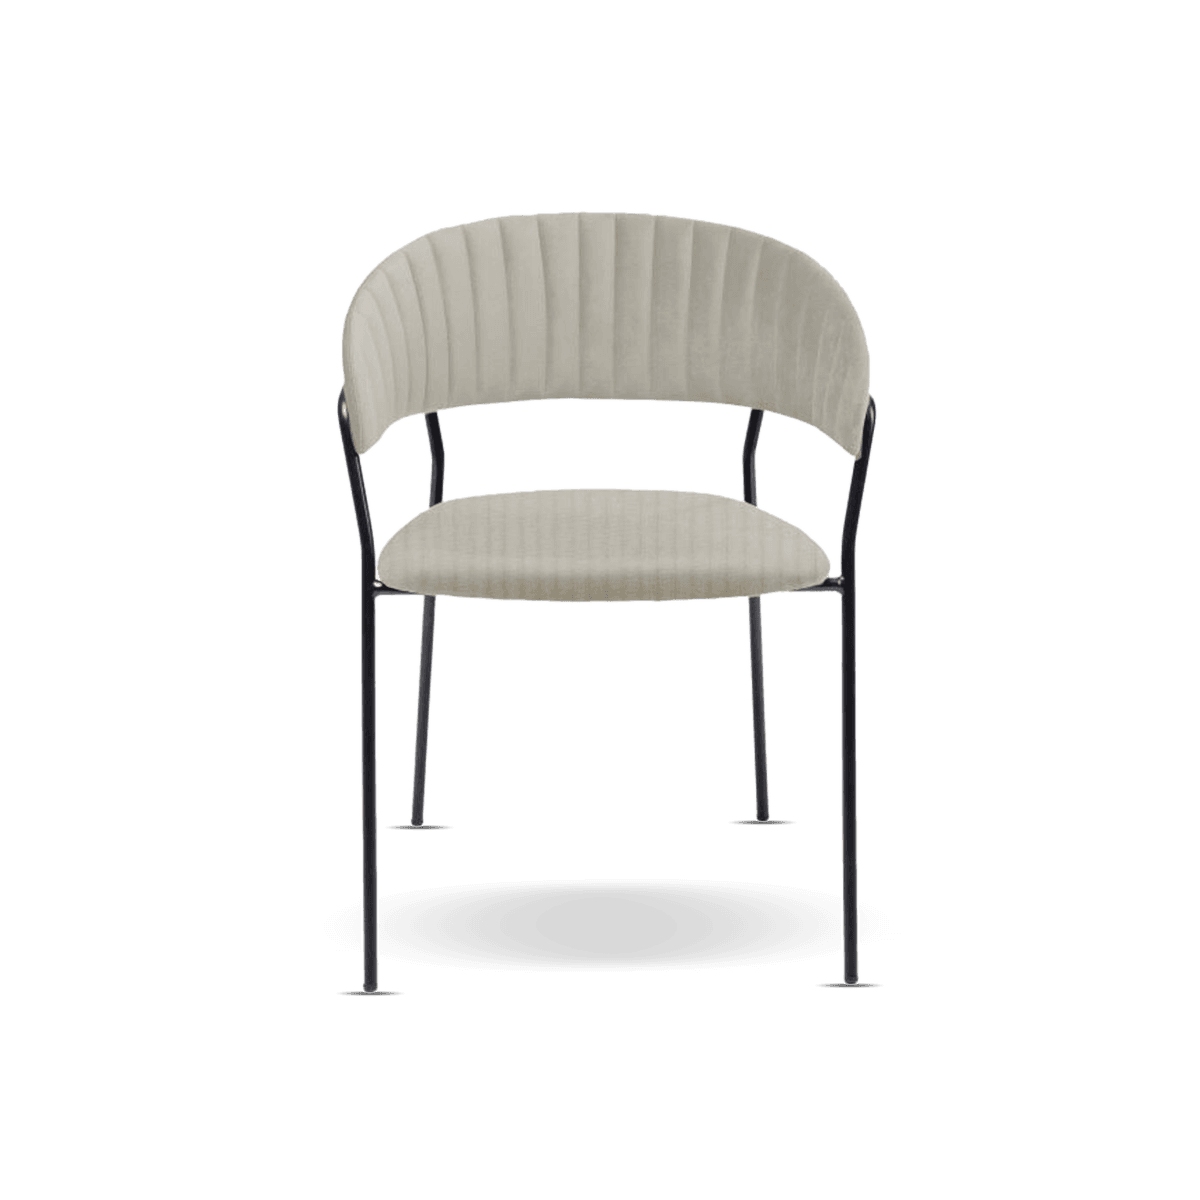 Dining Chair With Arm Rest Belle Cord Beige